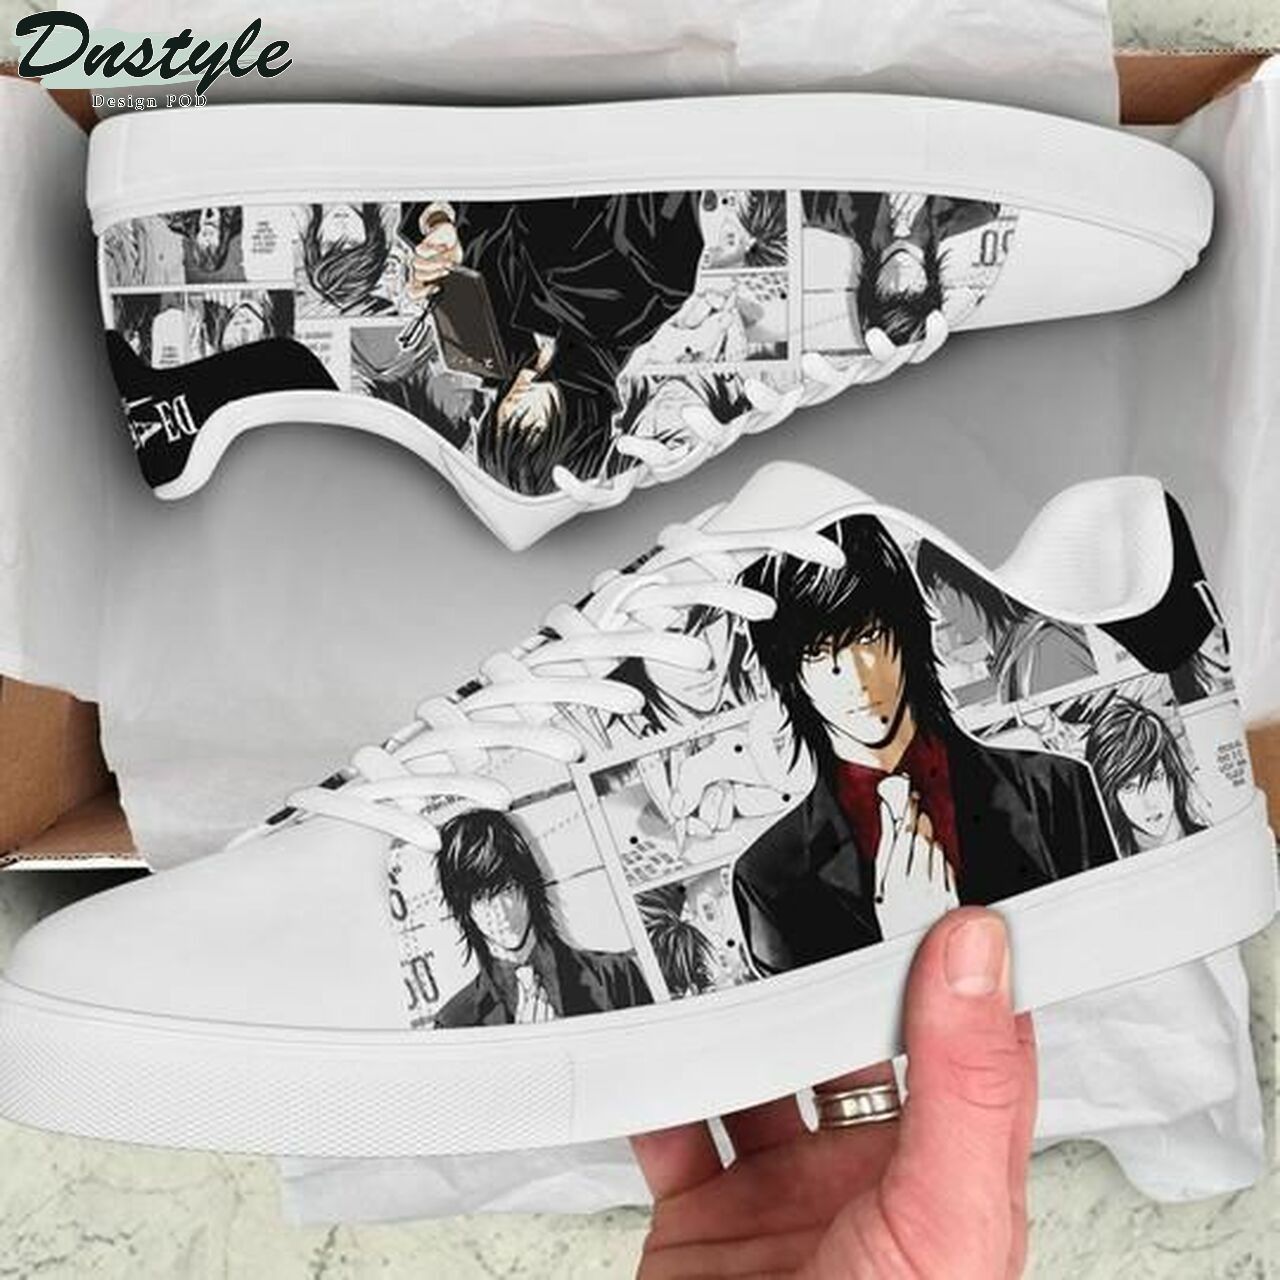 Teru mikami death note stan smith low top skate shoes